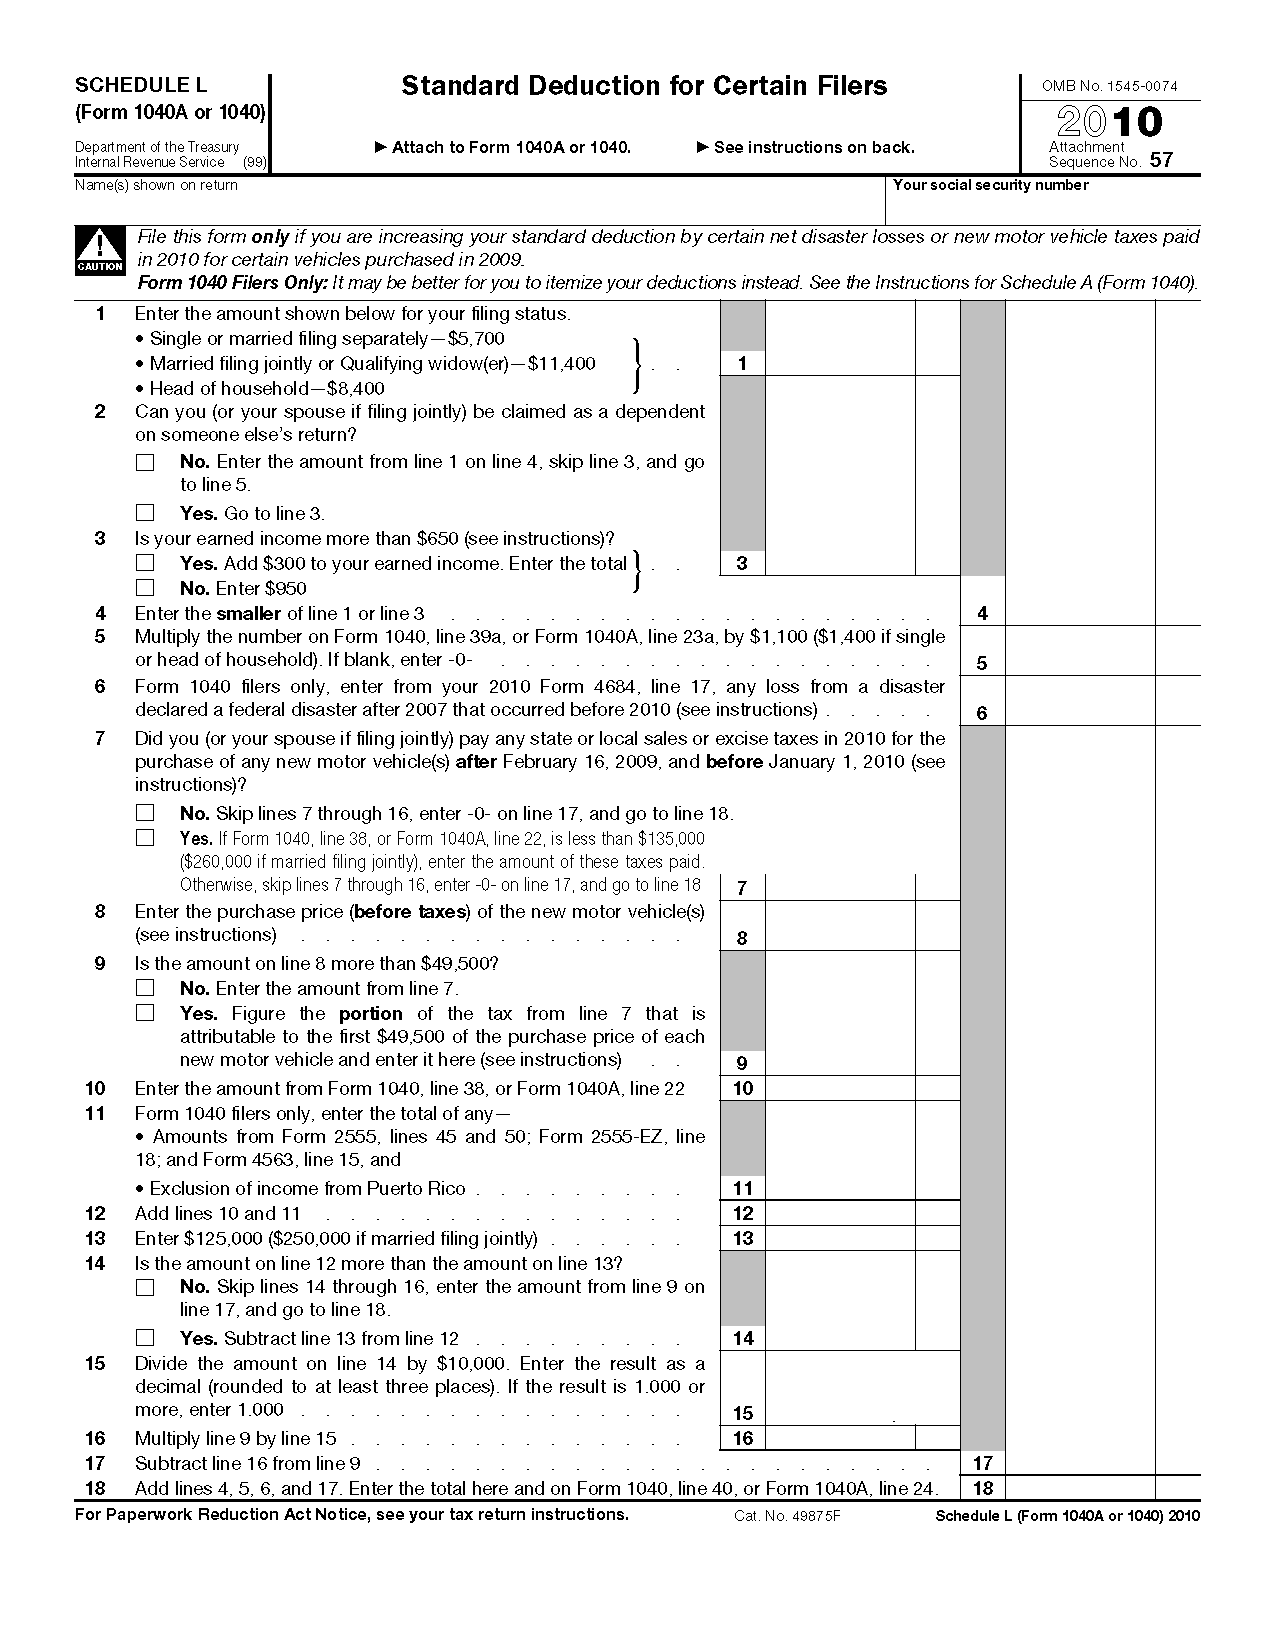 14-best-images-of-federal-itemized-deductions-worksheet-federal